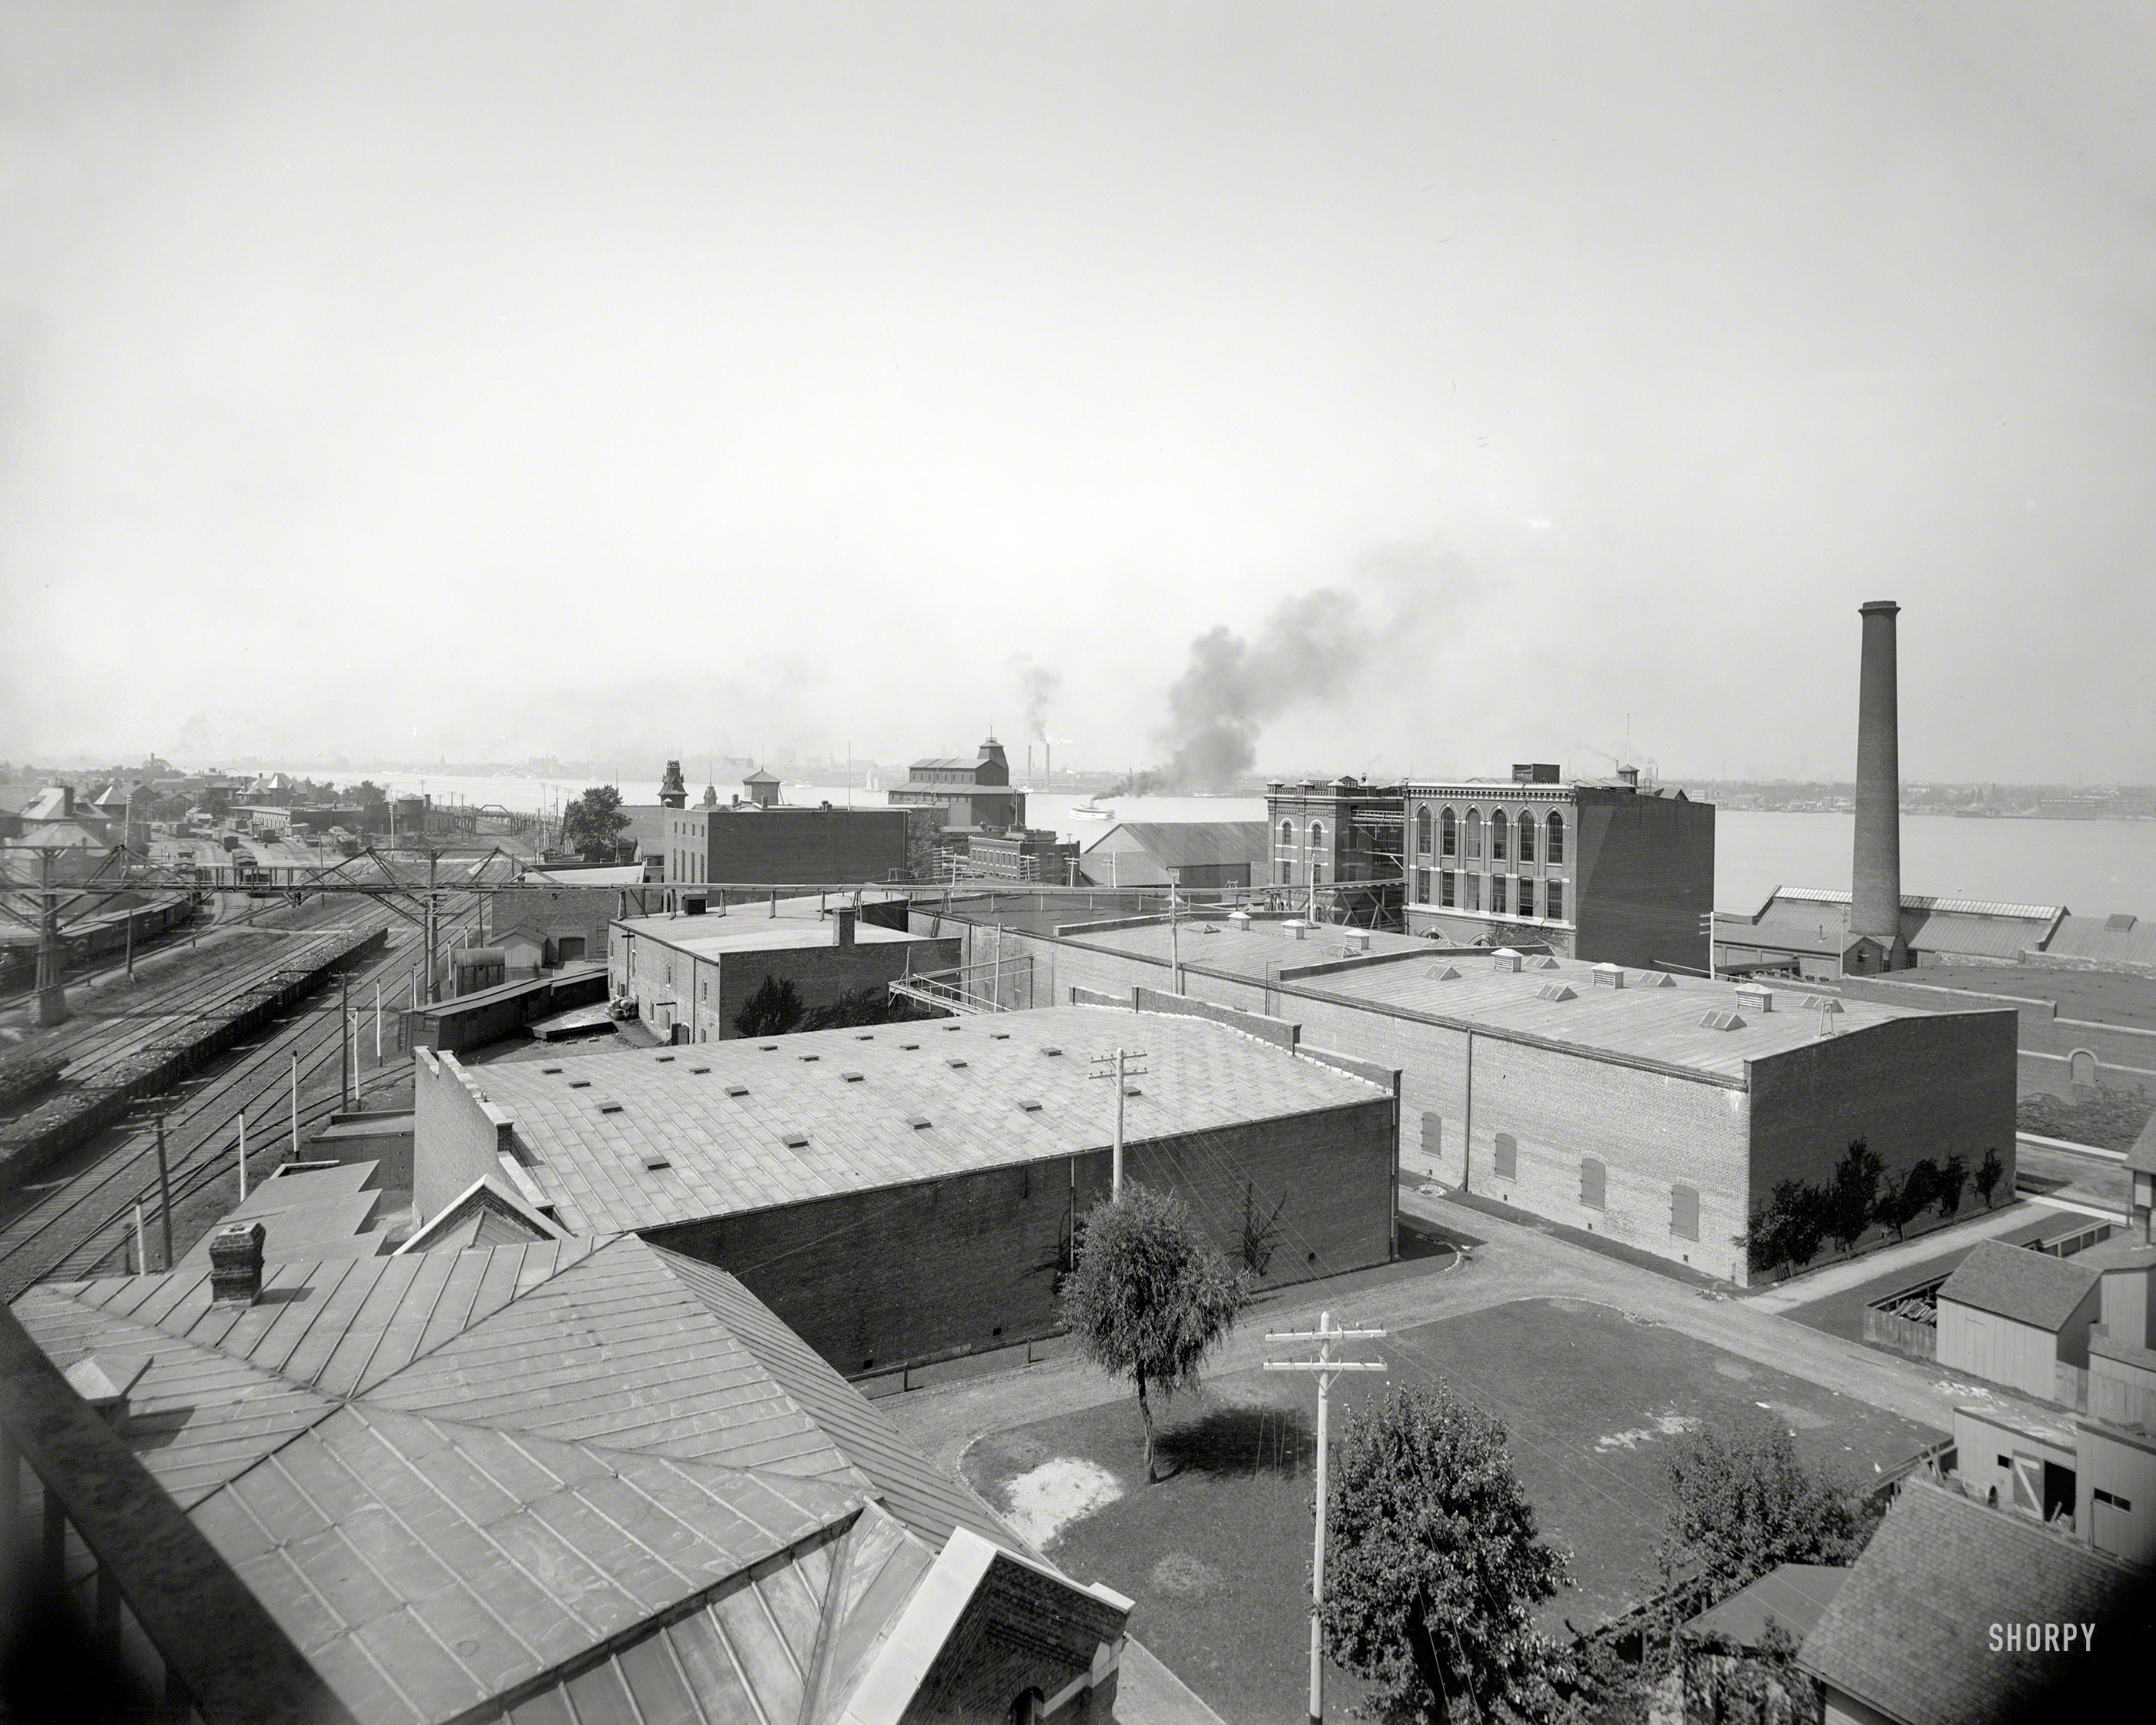 Circa 1899. "Hiram Walker & Sons, Walkerville, Ontario." Premises of the venerable Canadian distillery. 8x10 inch glass negative. View full size.